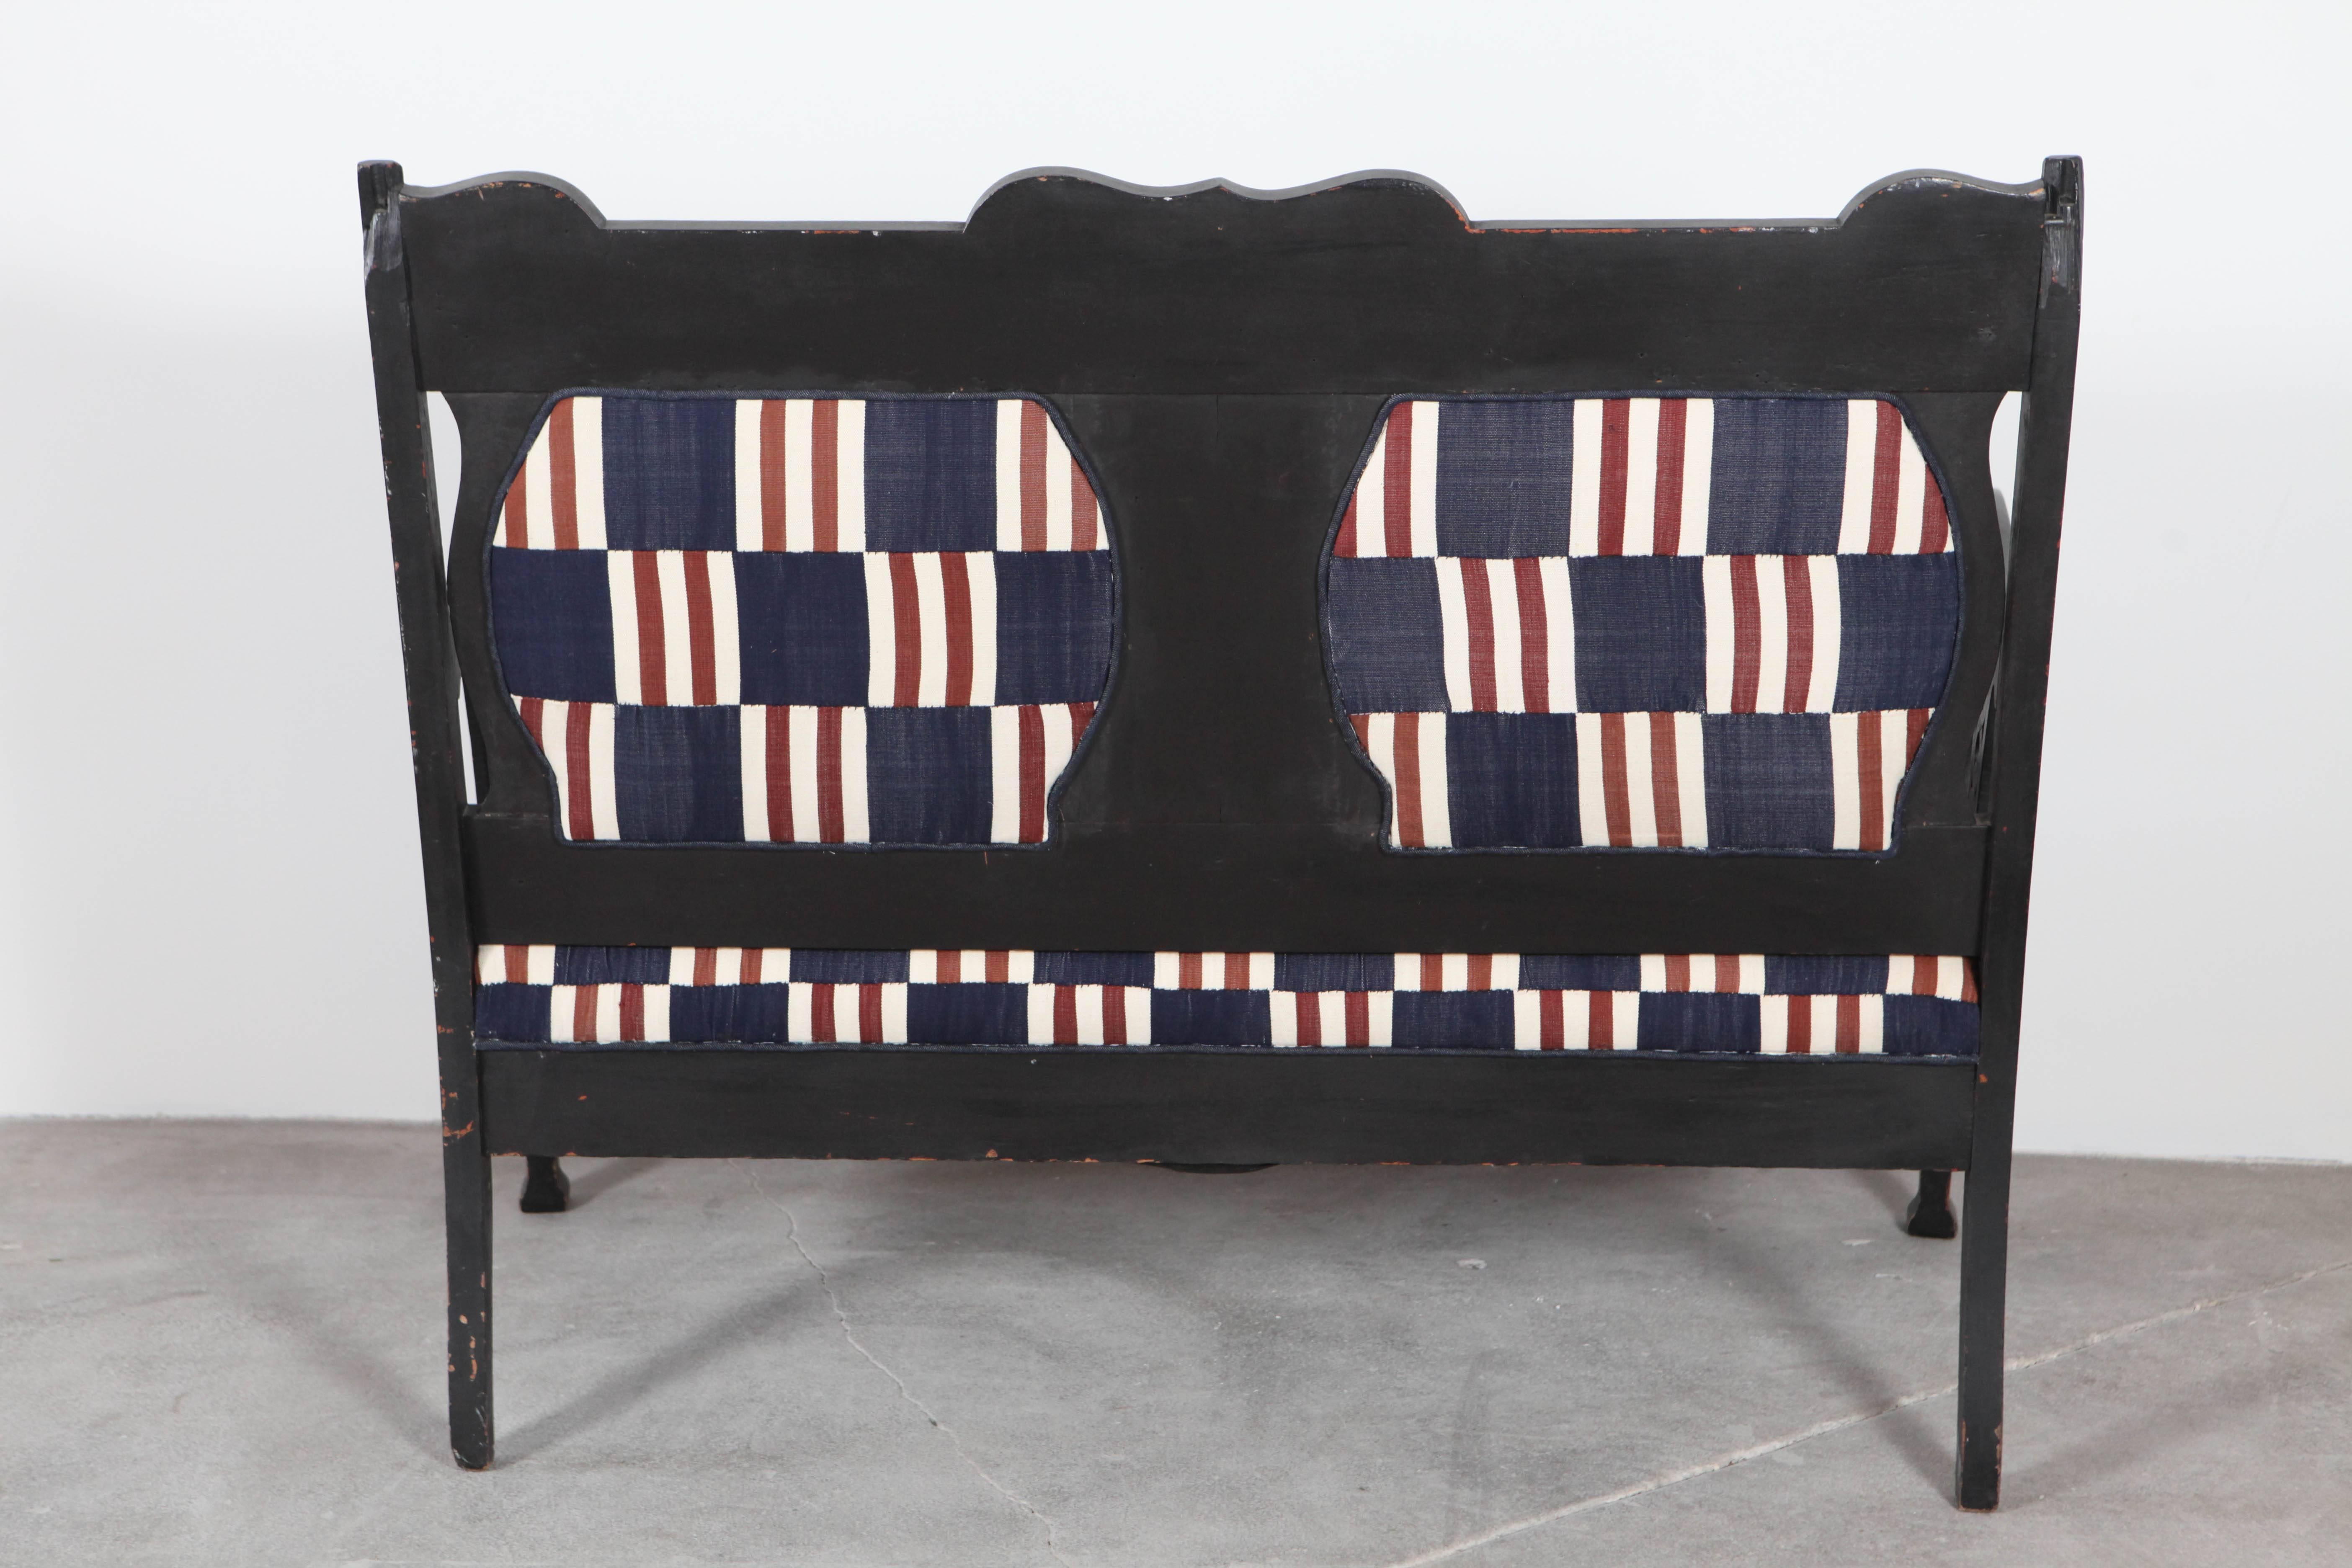 Edwardian Salon Large Settee Upholstered in Vintage African Fabric 1